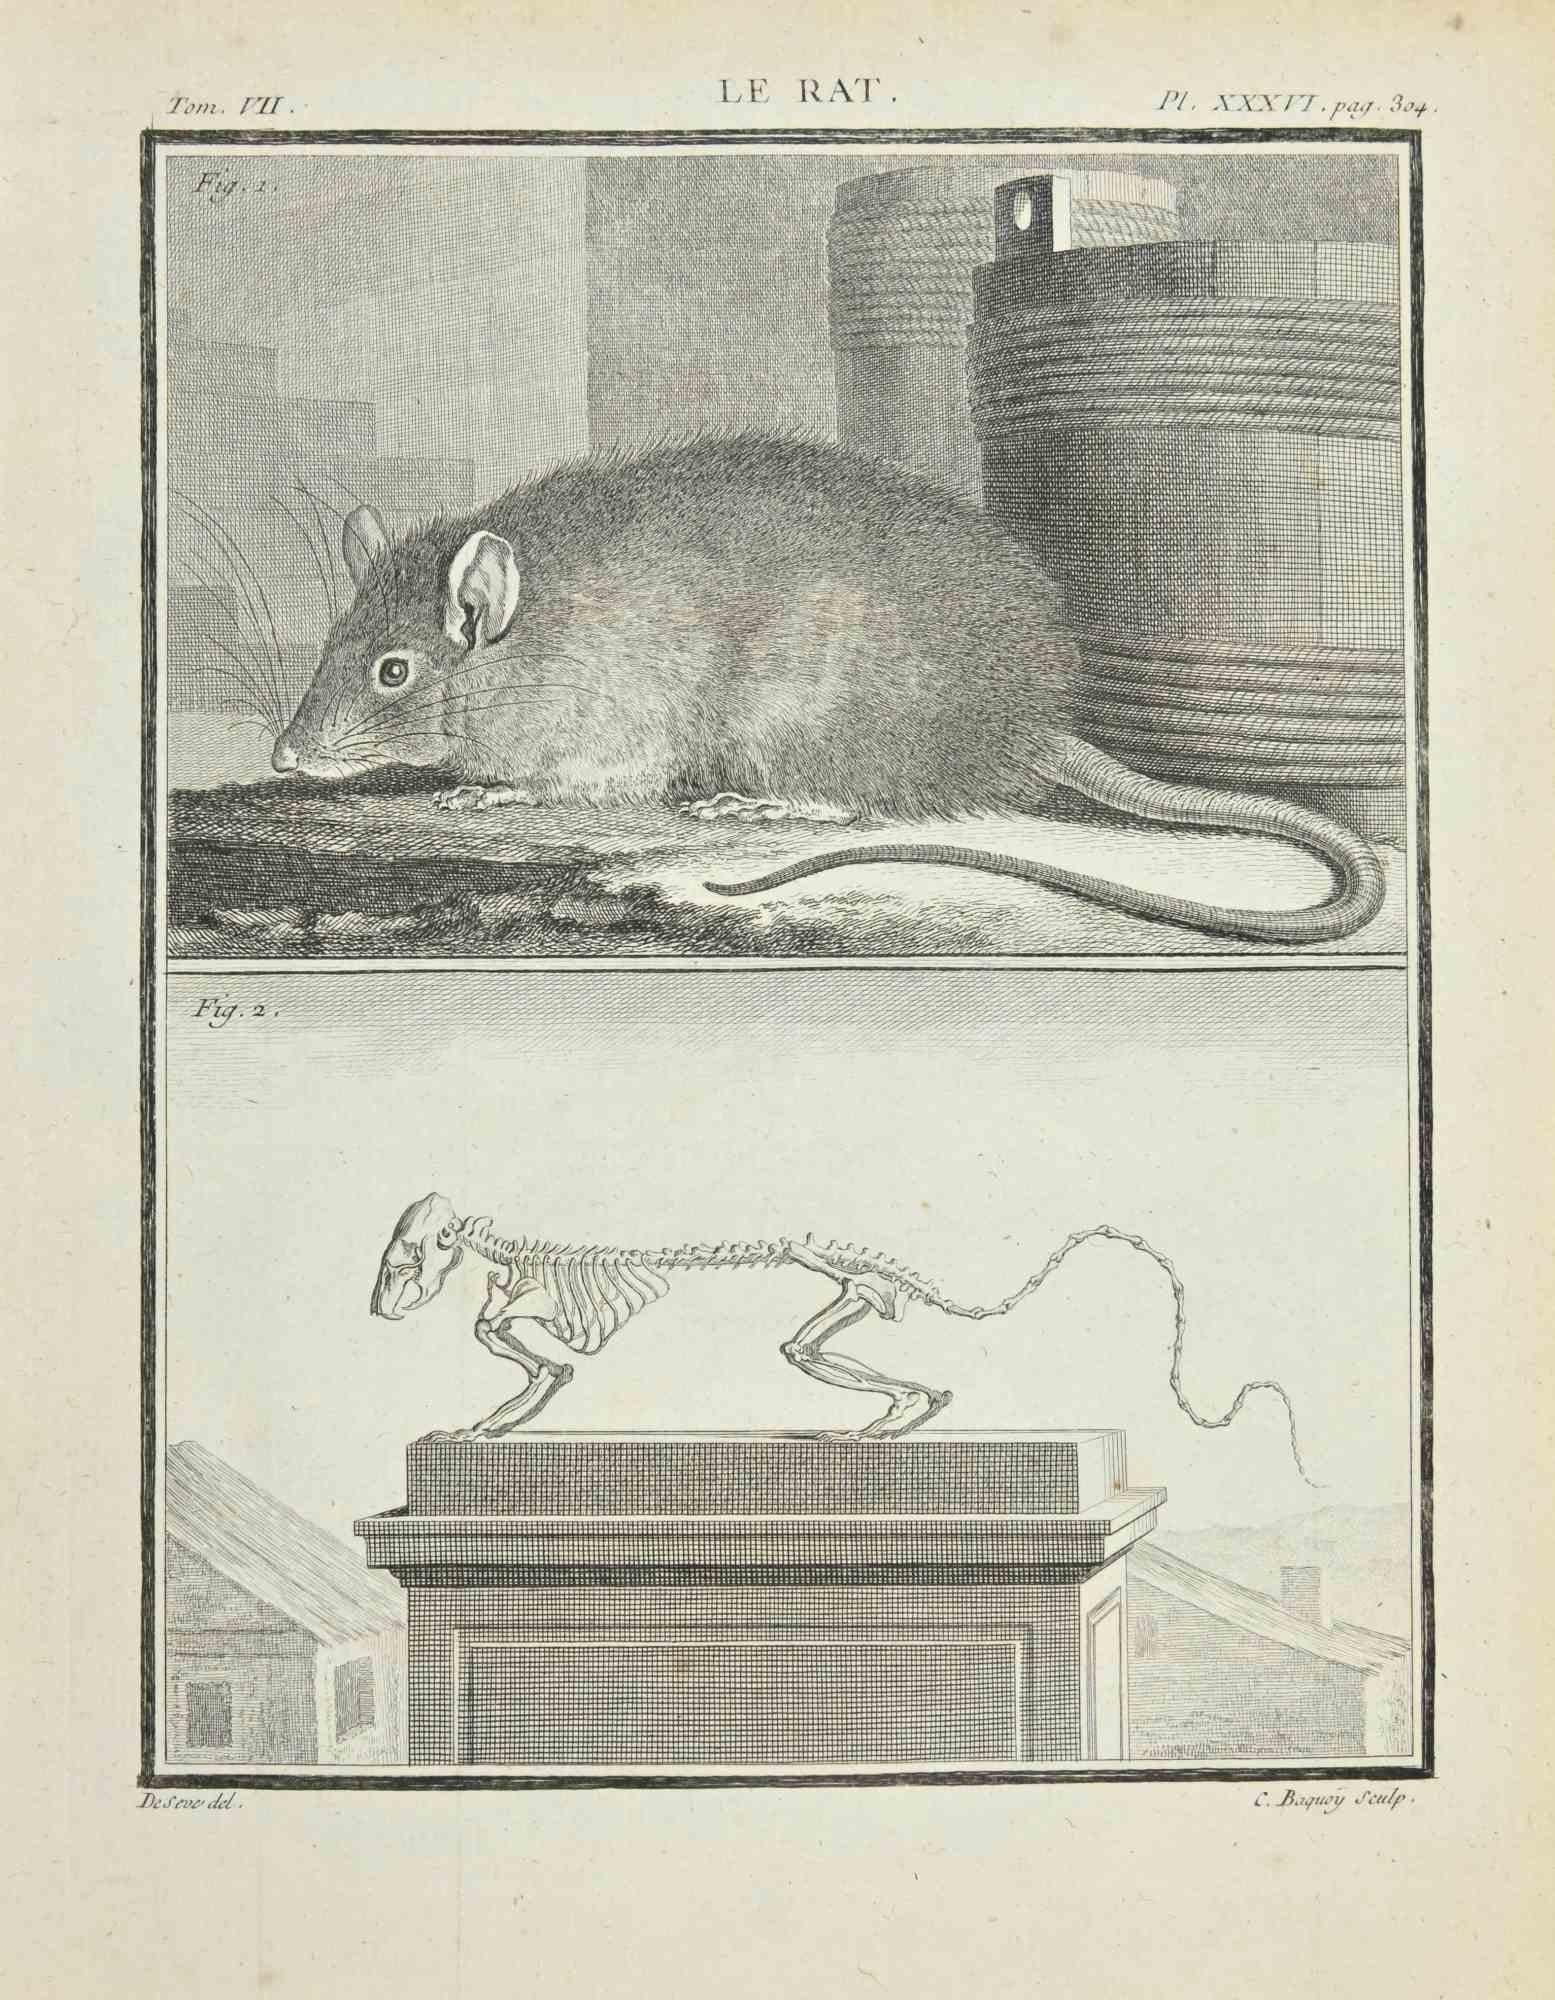 Le Rat is an etching realized by Jacques Baron in 1771.

It belongs to the suite "Histoire Naturelle de Buffon".

The Artist's signature is engraved lower right.

Good conditions with light foxing.